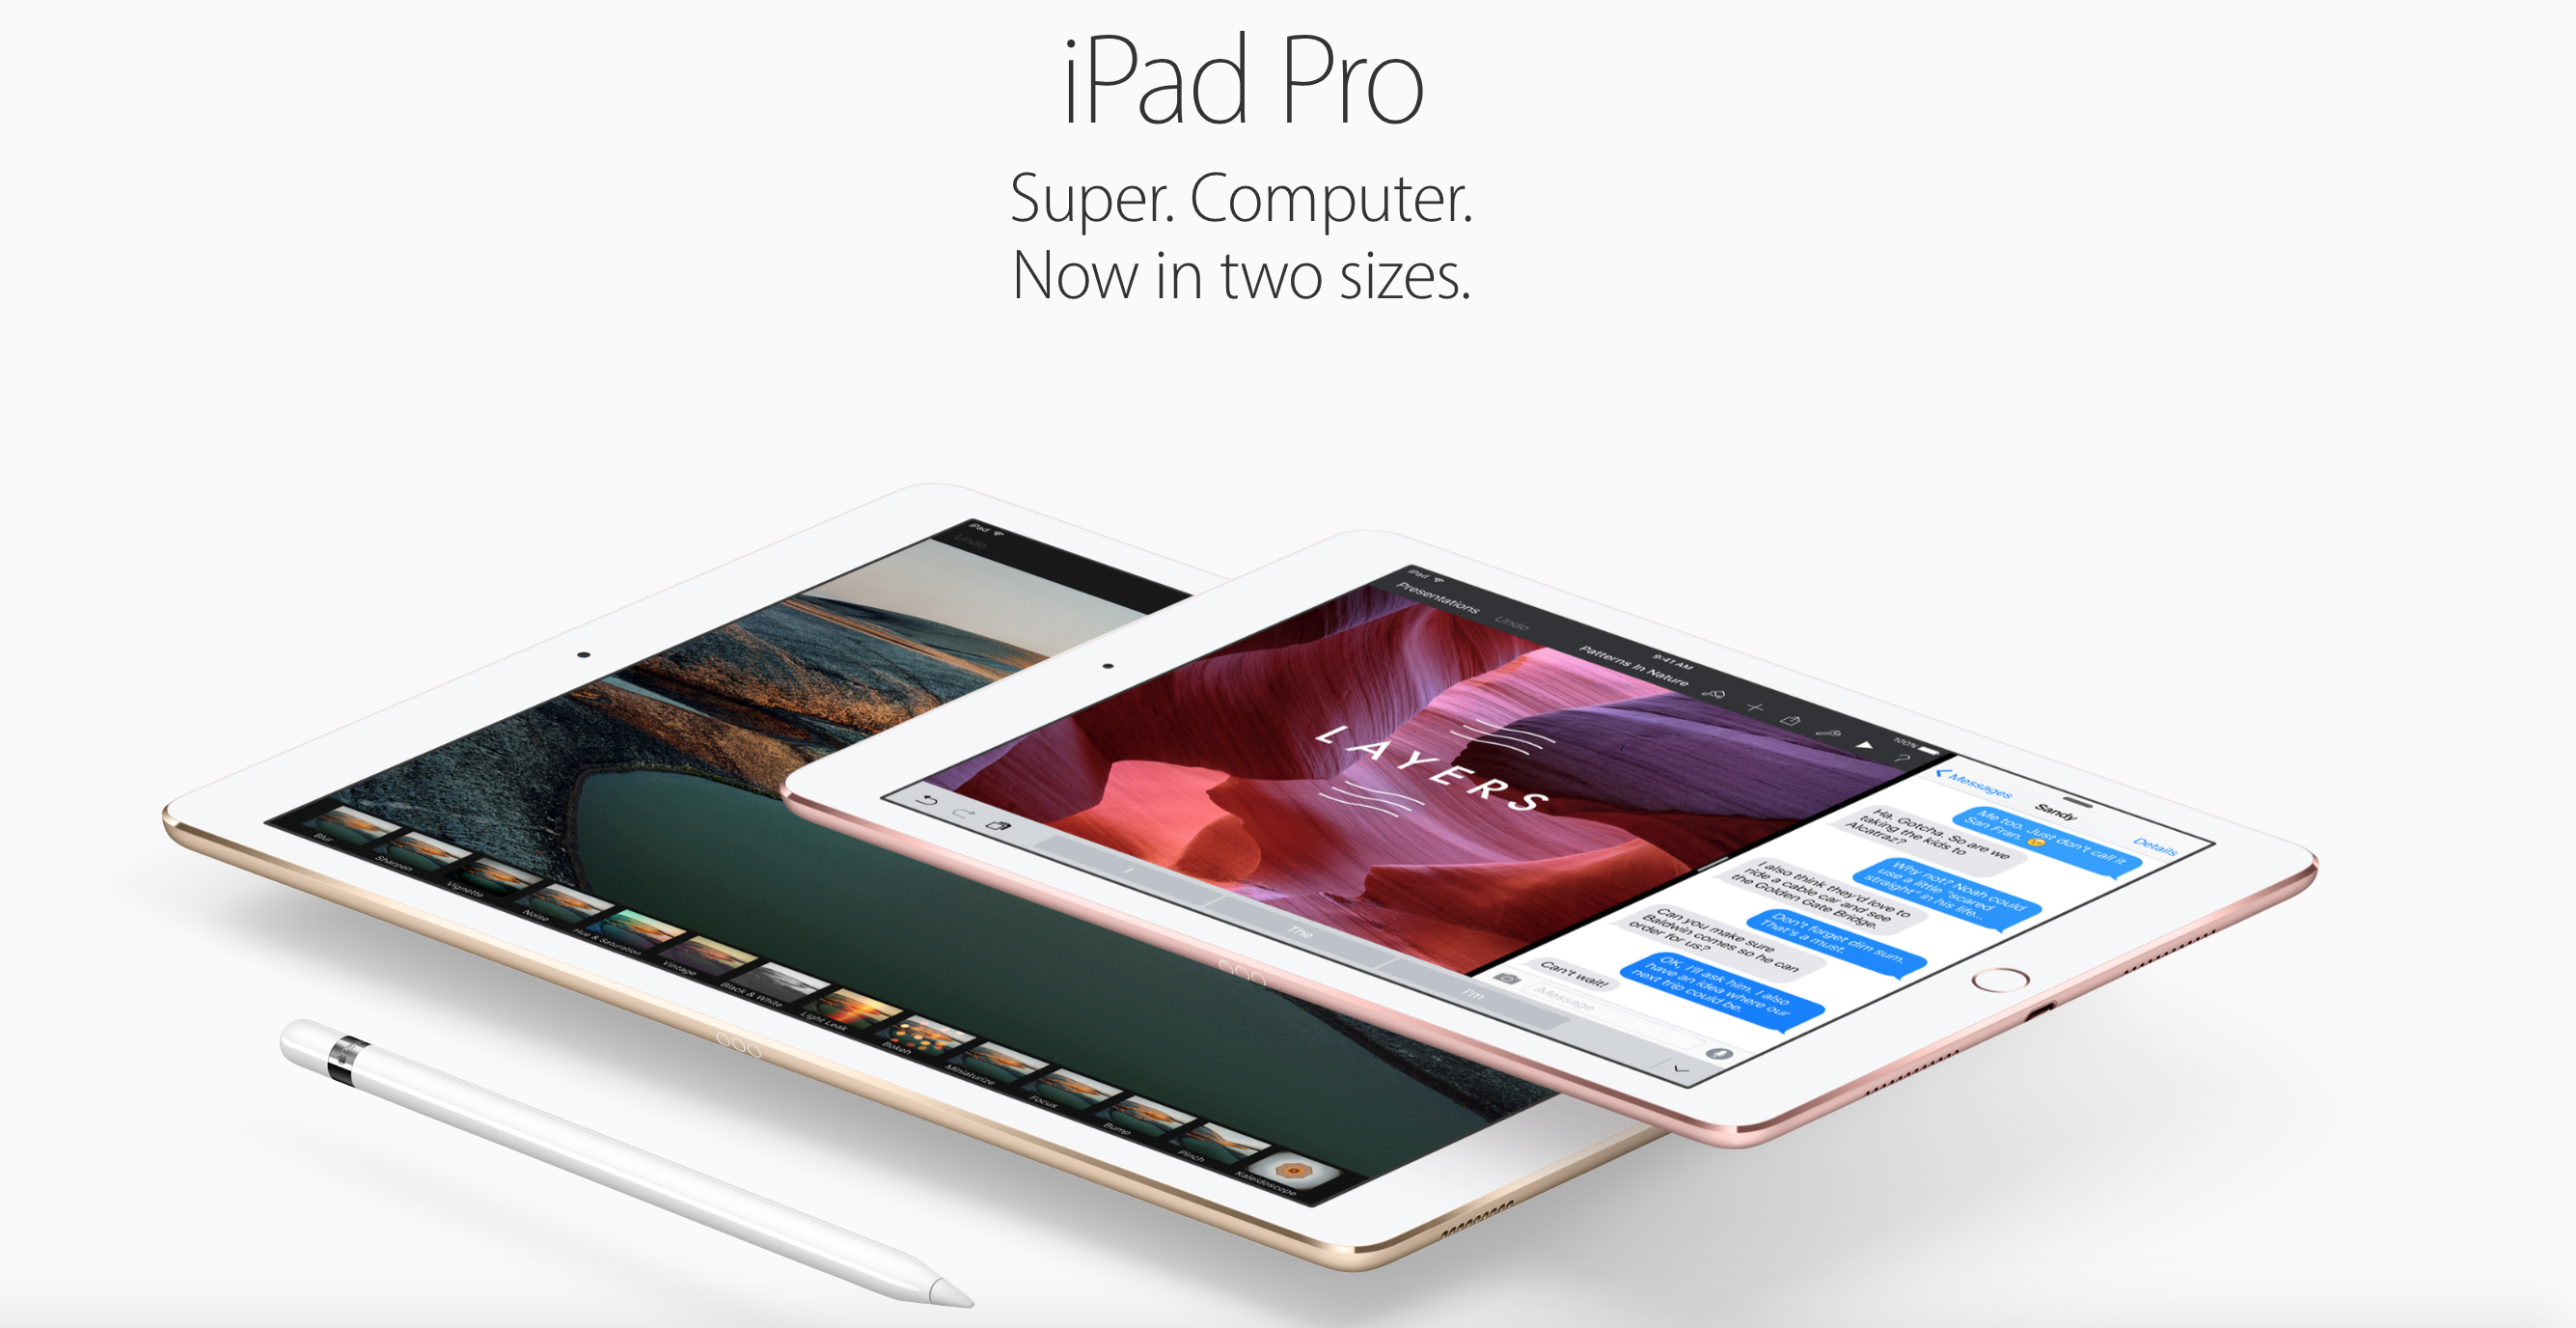 Apple iPad Pro 9.7 Price in India, Launch Dates iGyaan